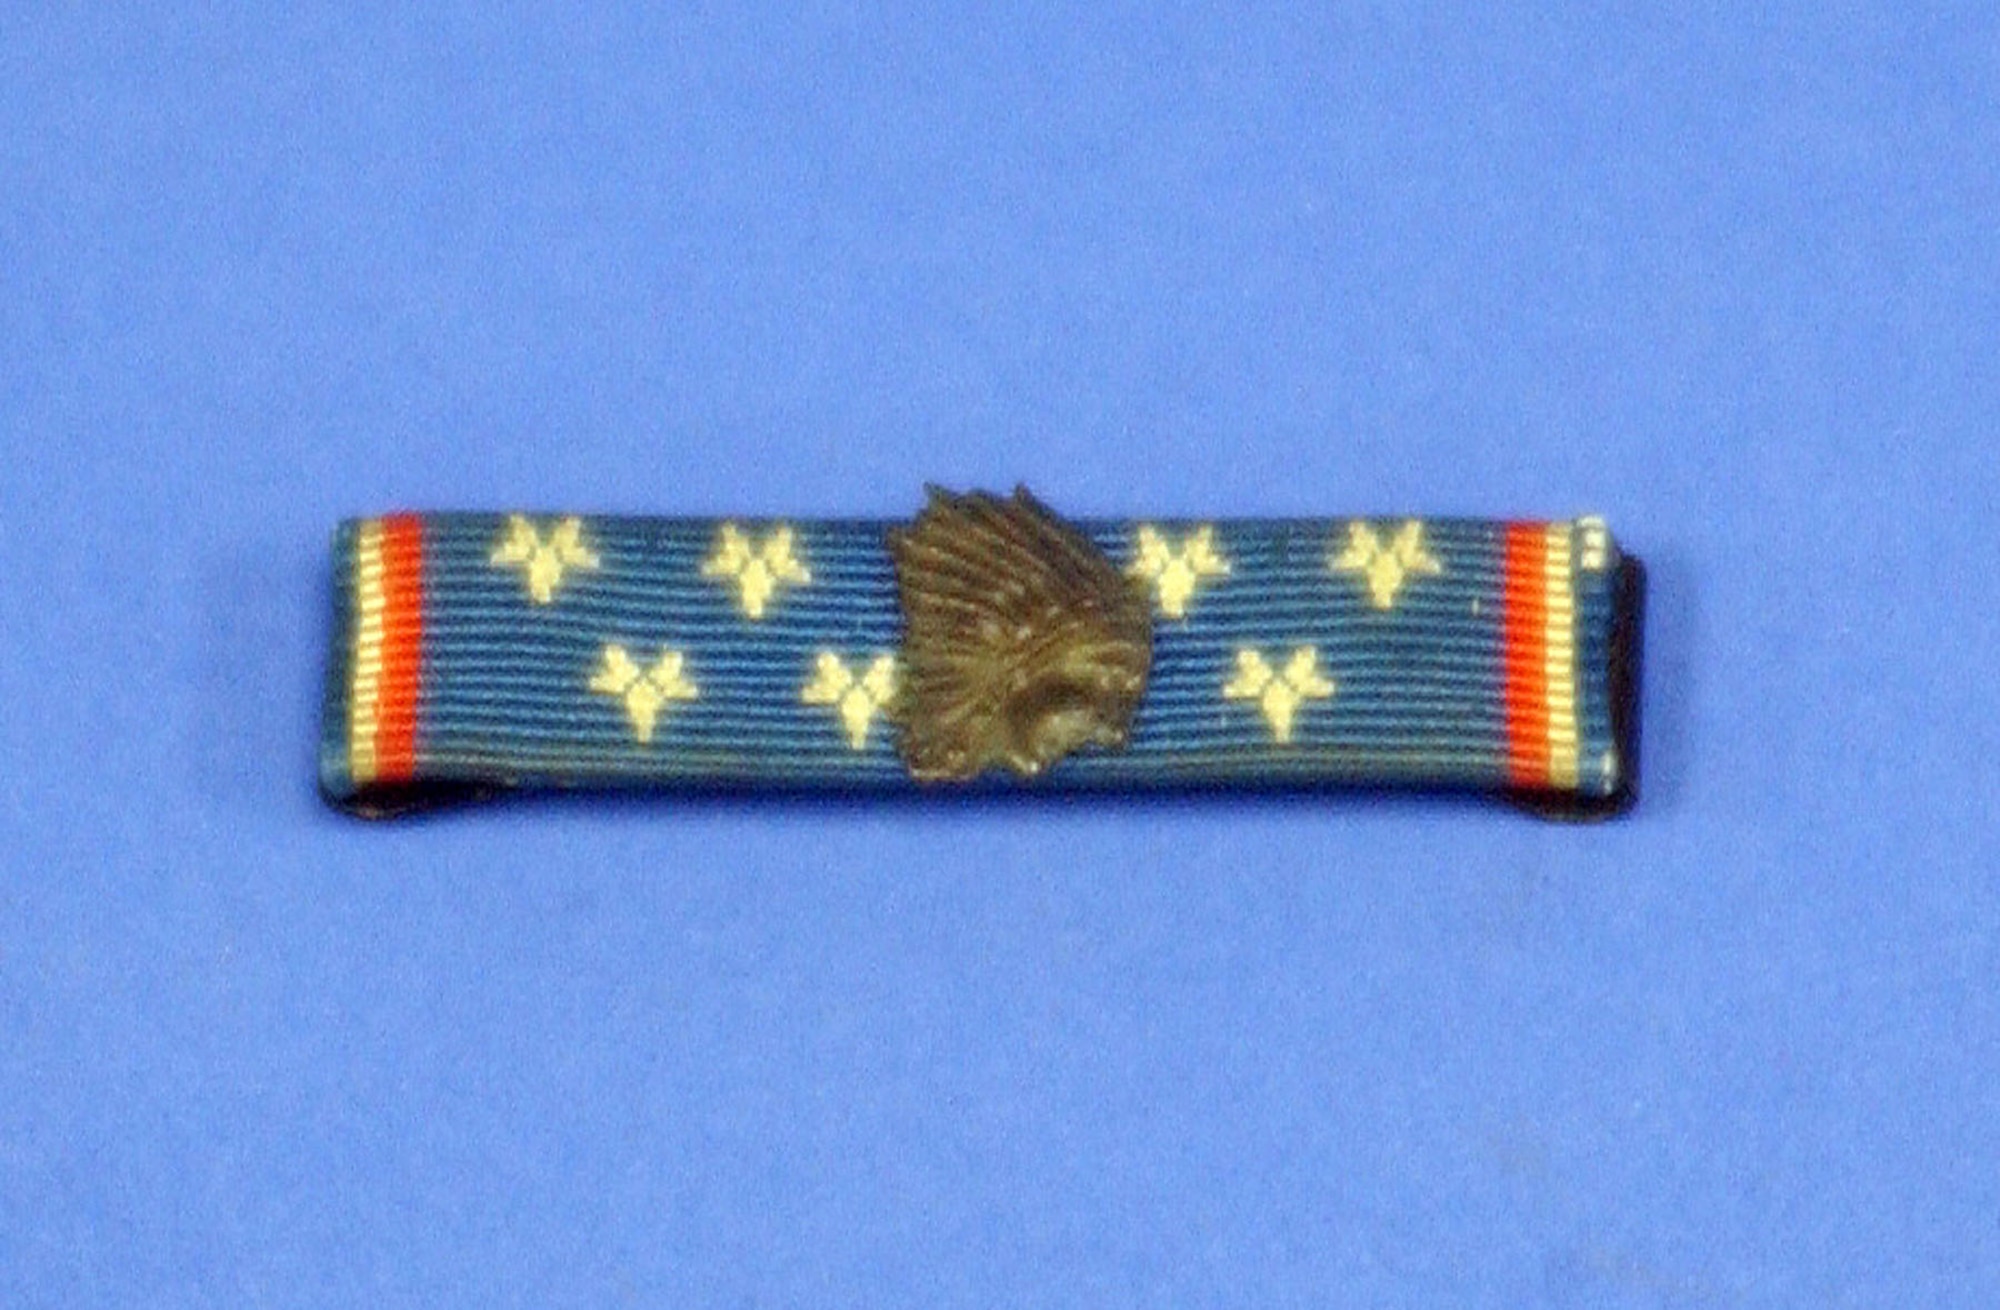 The Lafayette Flying Corps ribbon was awarded in the fall of 1918 to the 214 Americans in the French Air Service. This ribbon belonged to David E. Putnam. (U.S. Air Force photo)